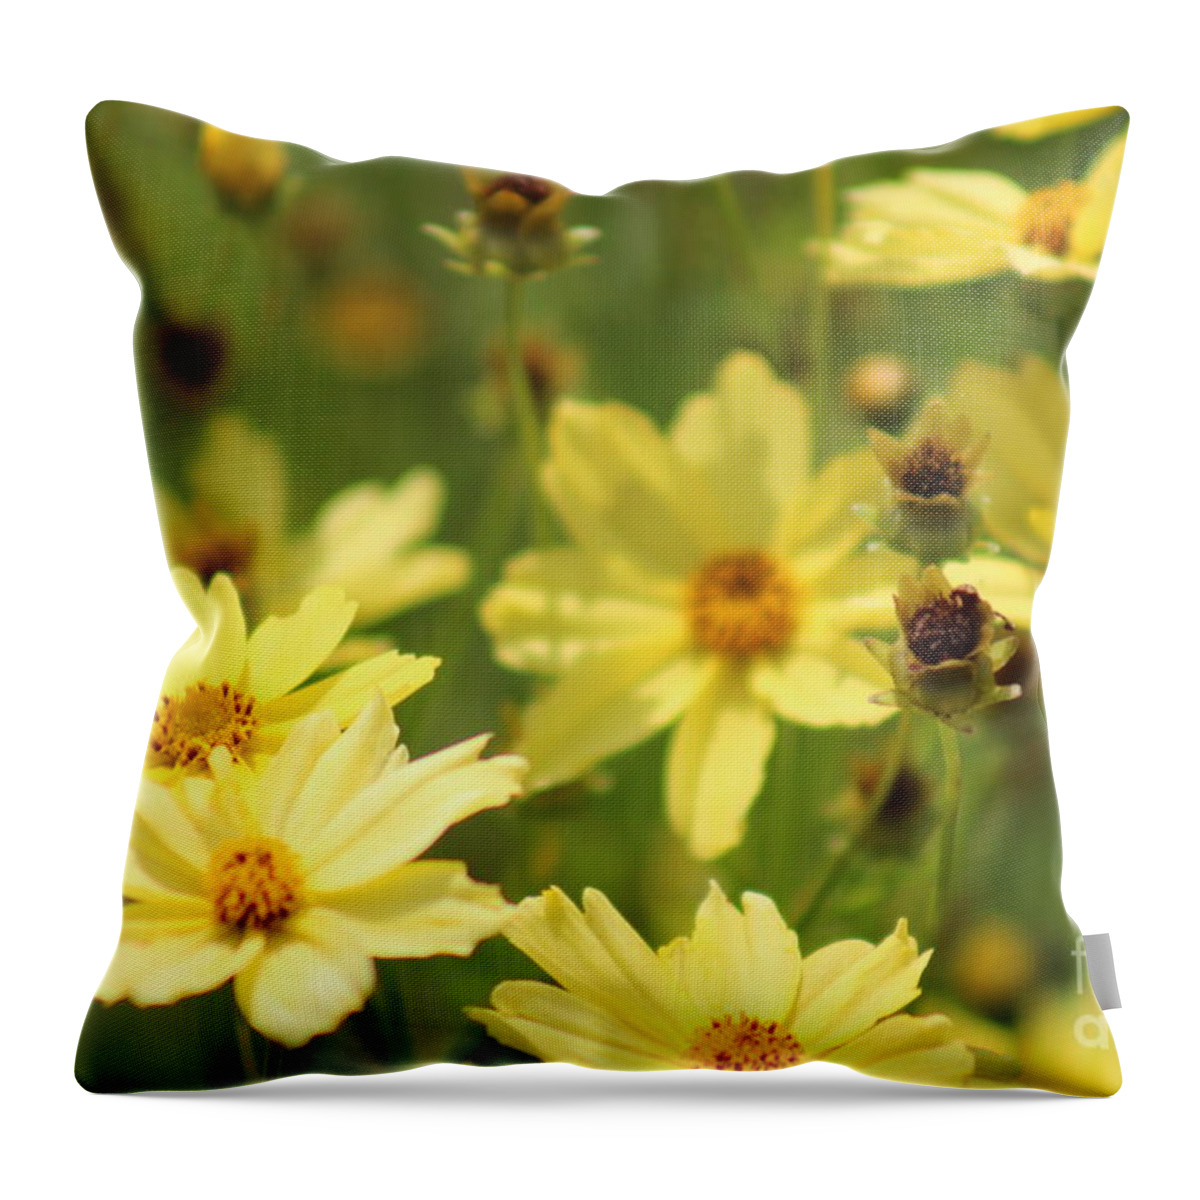 Yellow Throw Pillow featuring the photograph Nature's Beauty 61 by Deena Withycombe